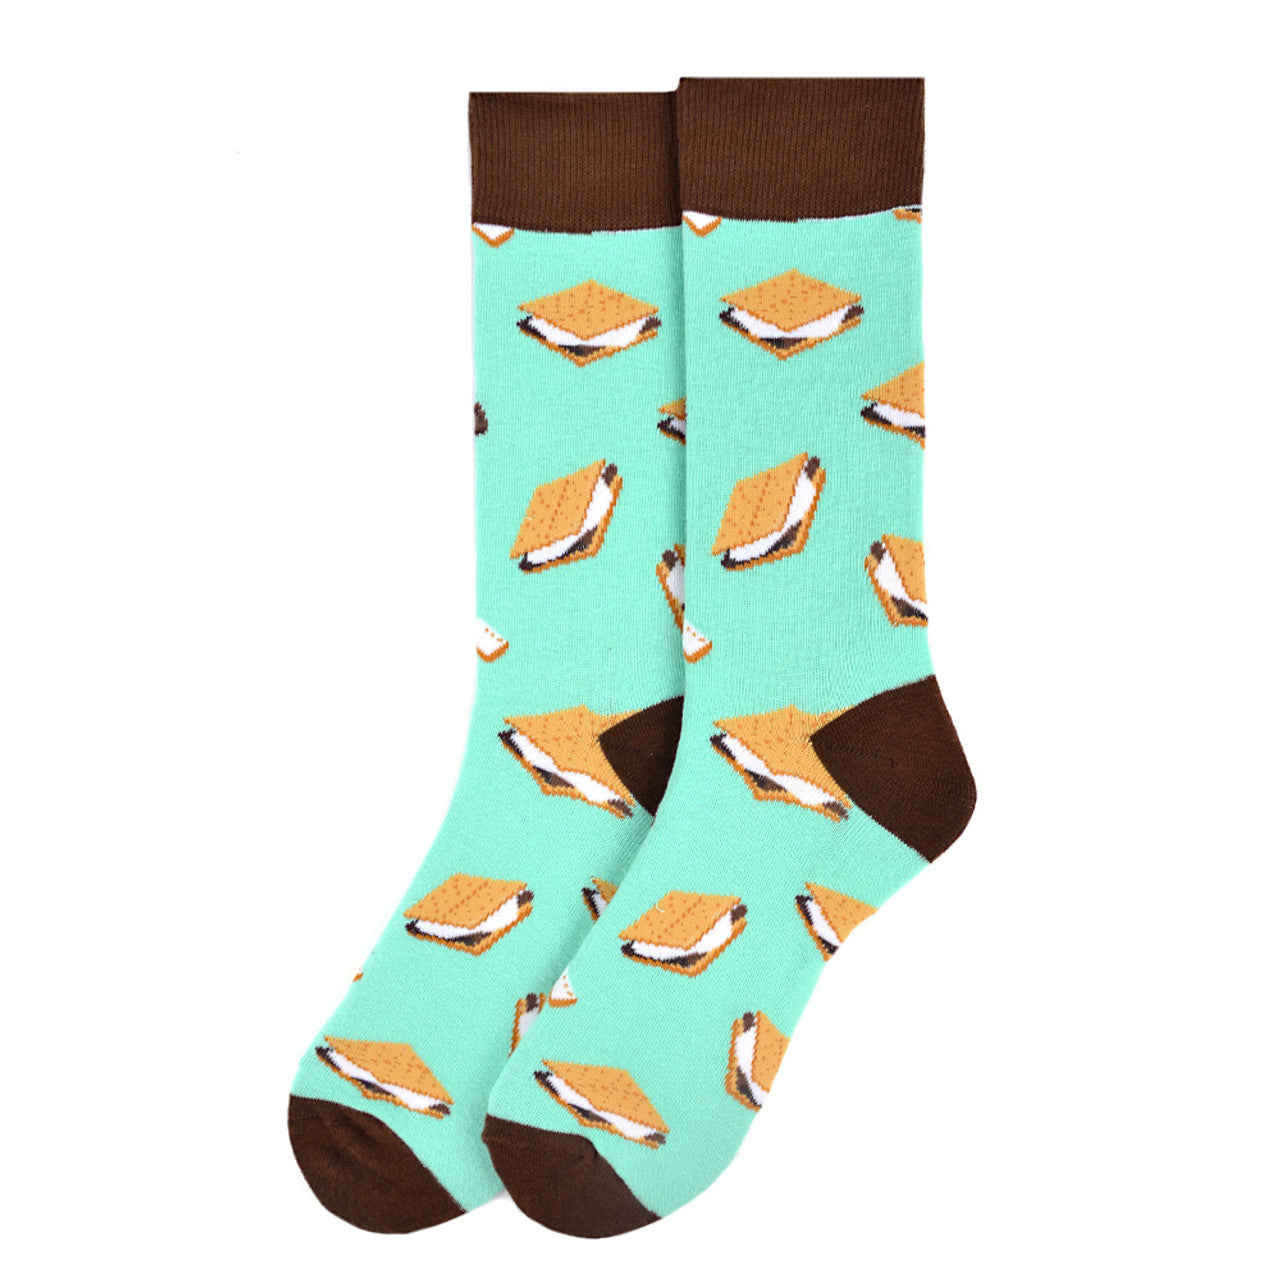 Men's S'mores Socks -  Sweet Style for Campers & Hikers!